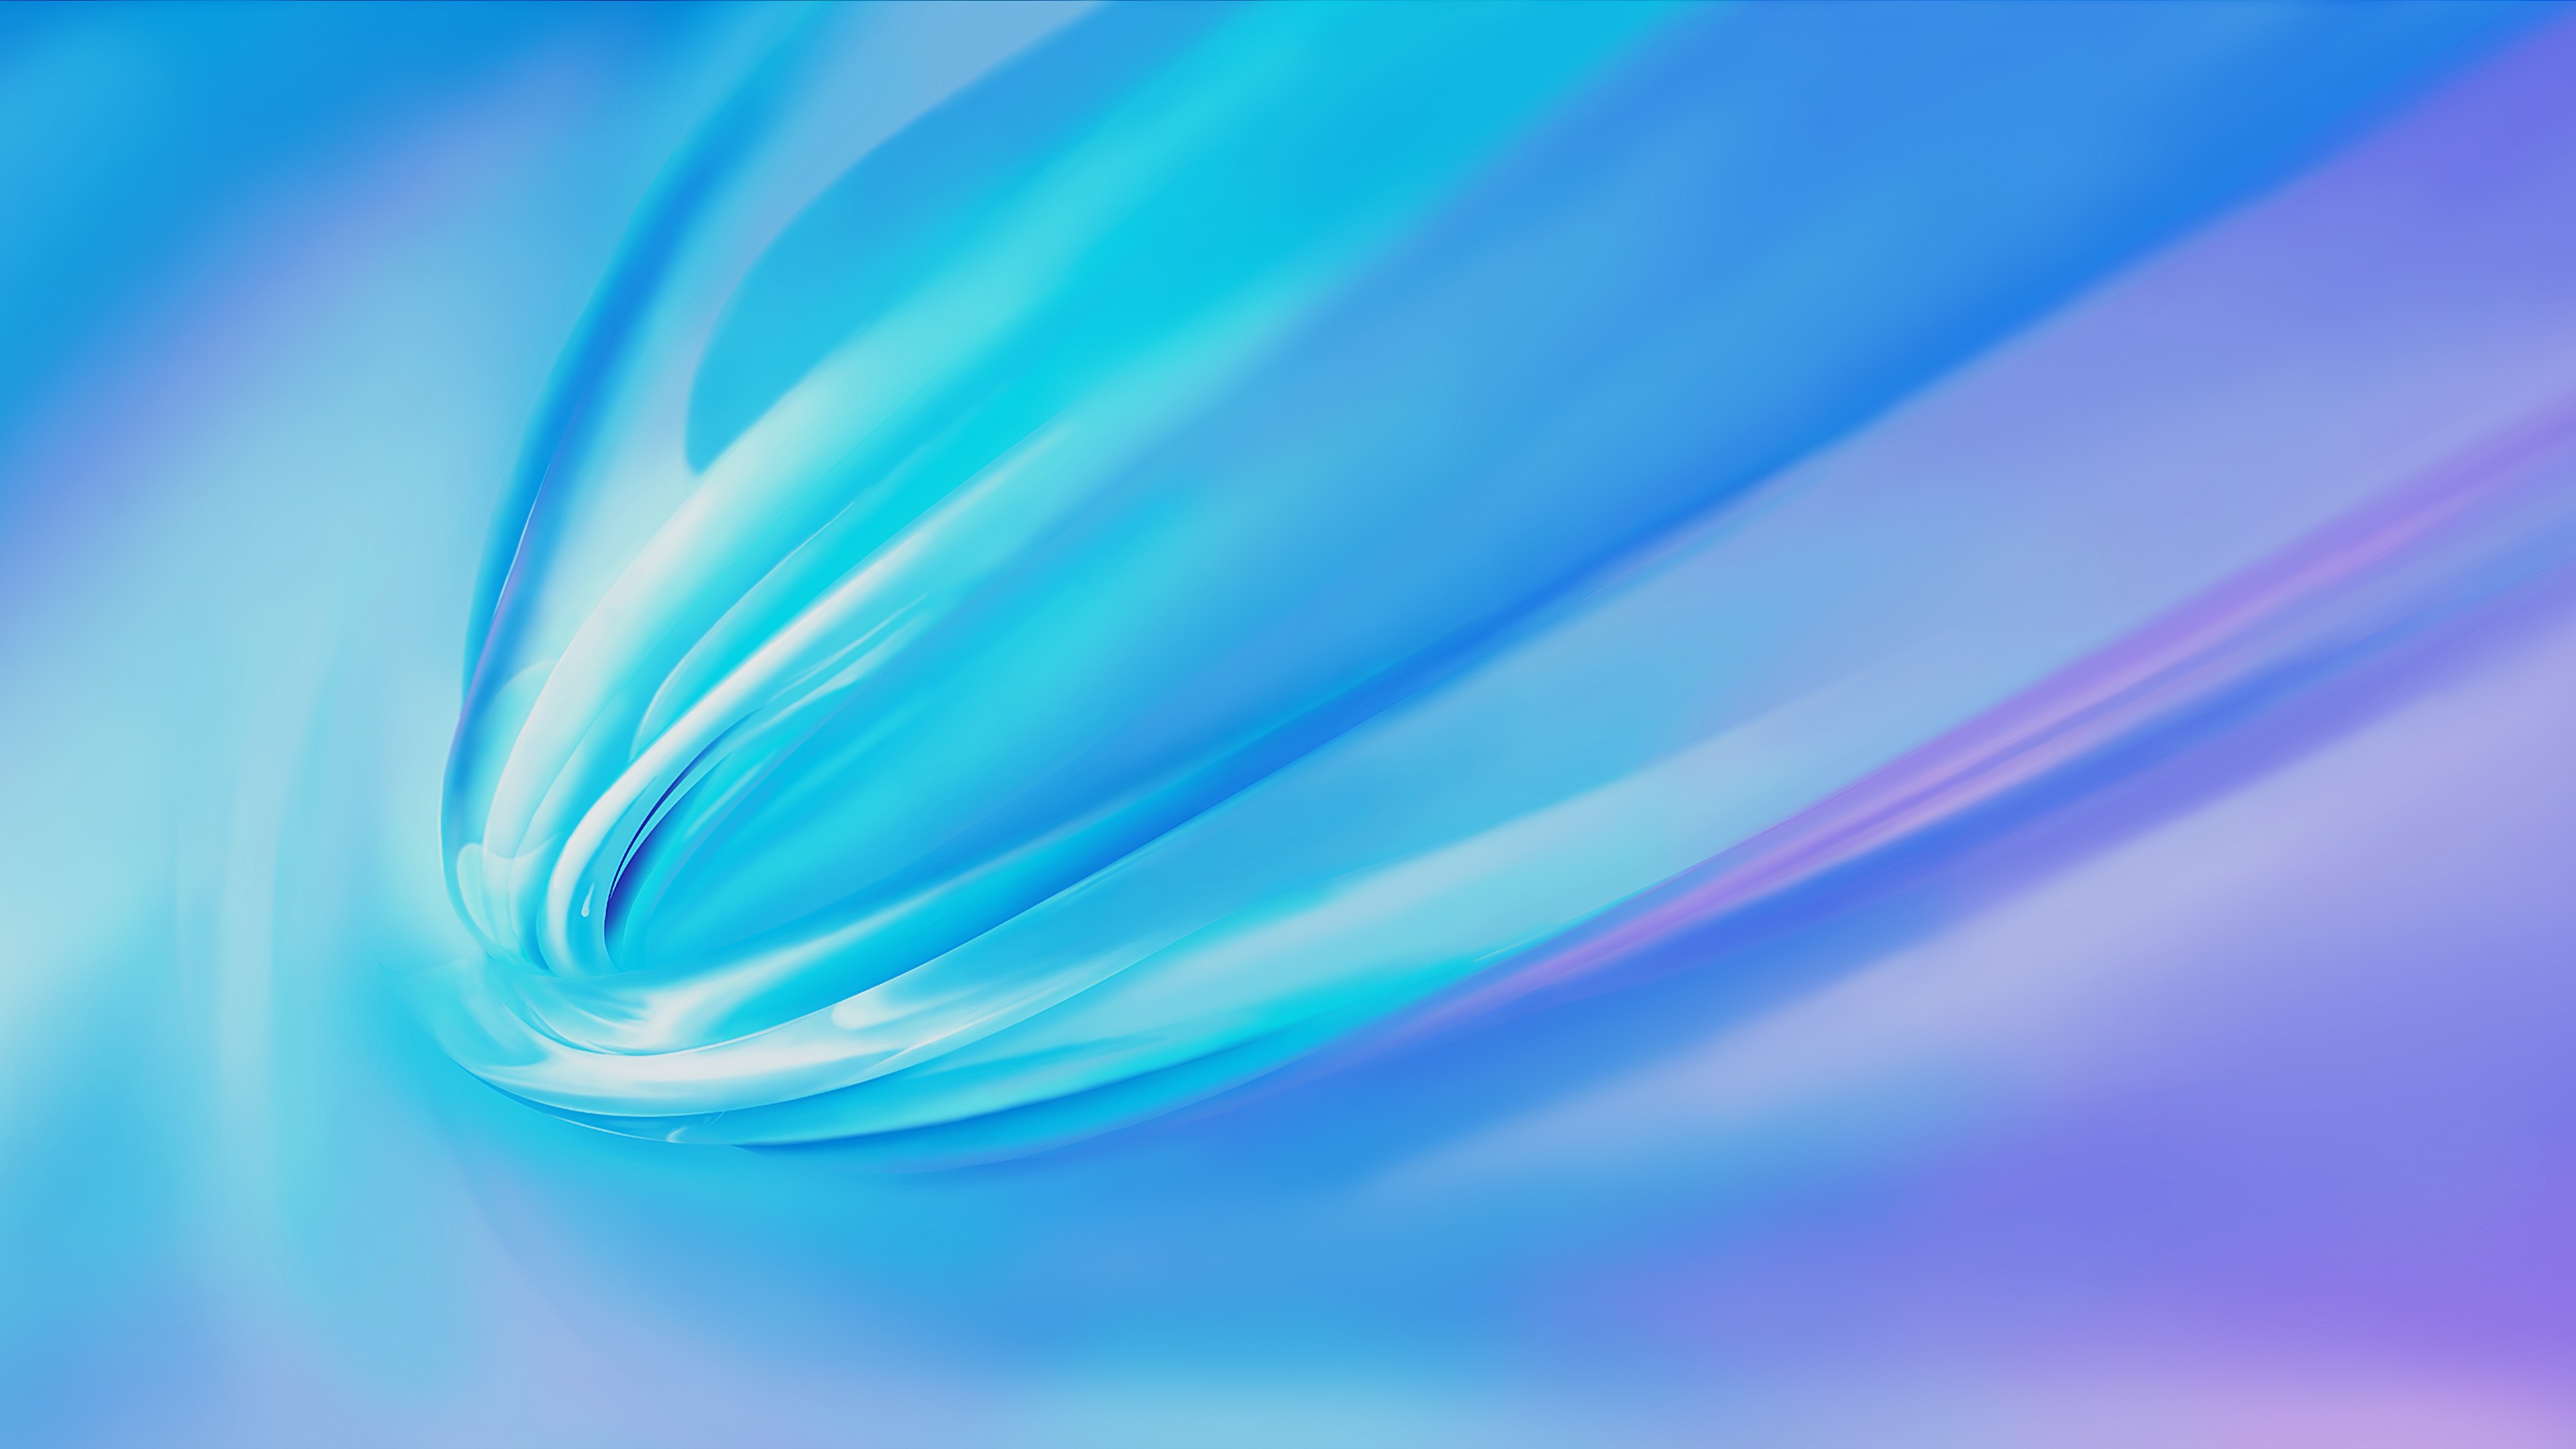 Abstract Shapes Blue Turquise Purple Digital Art 3840x2160